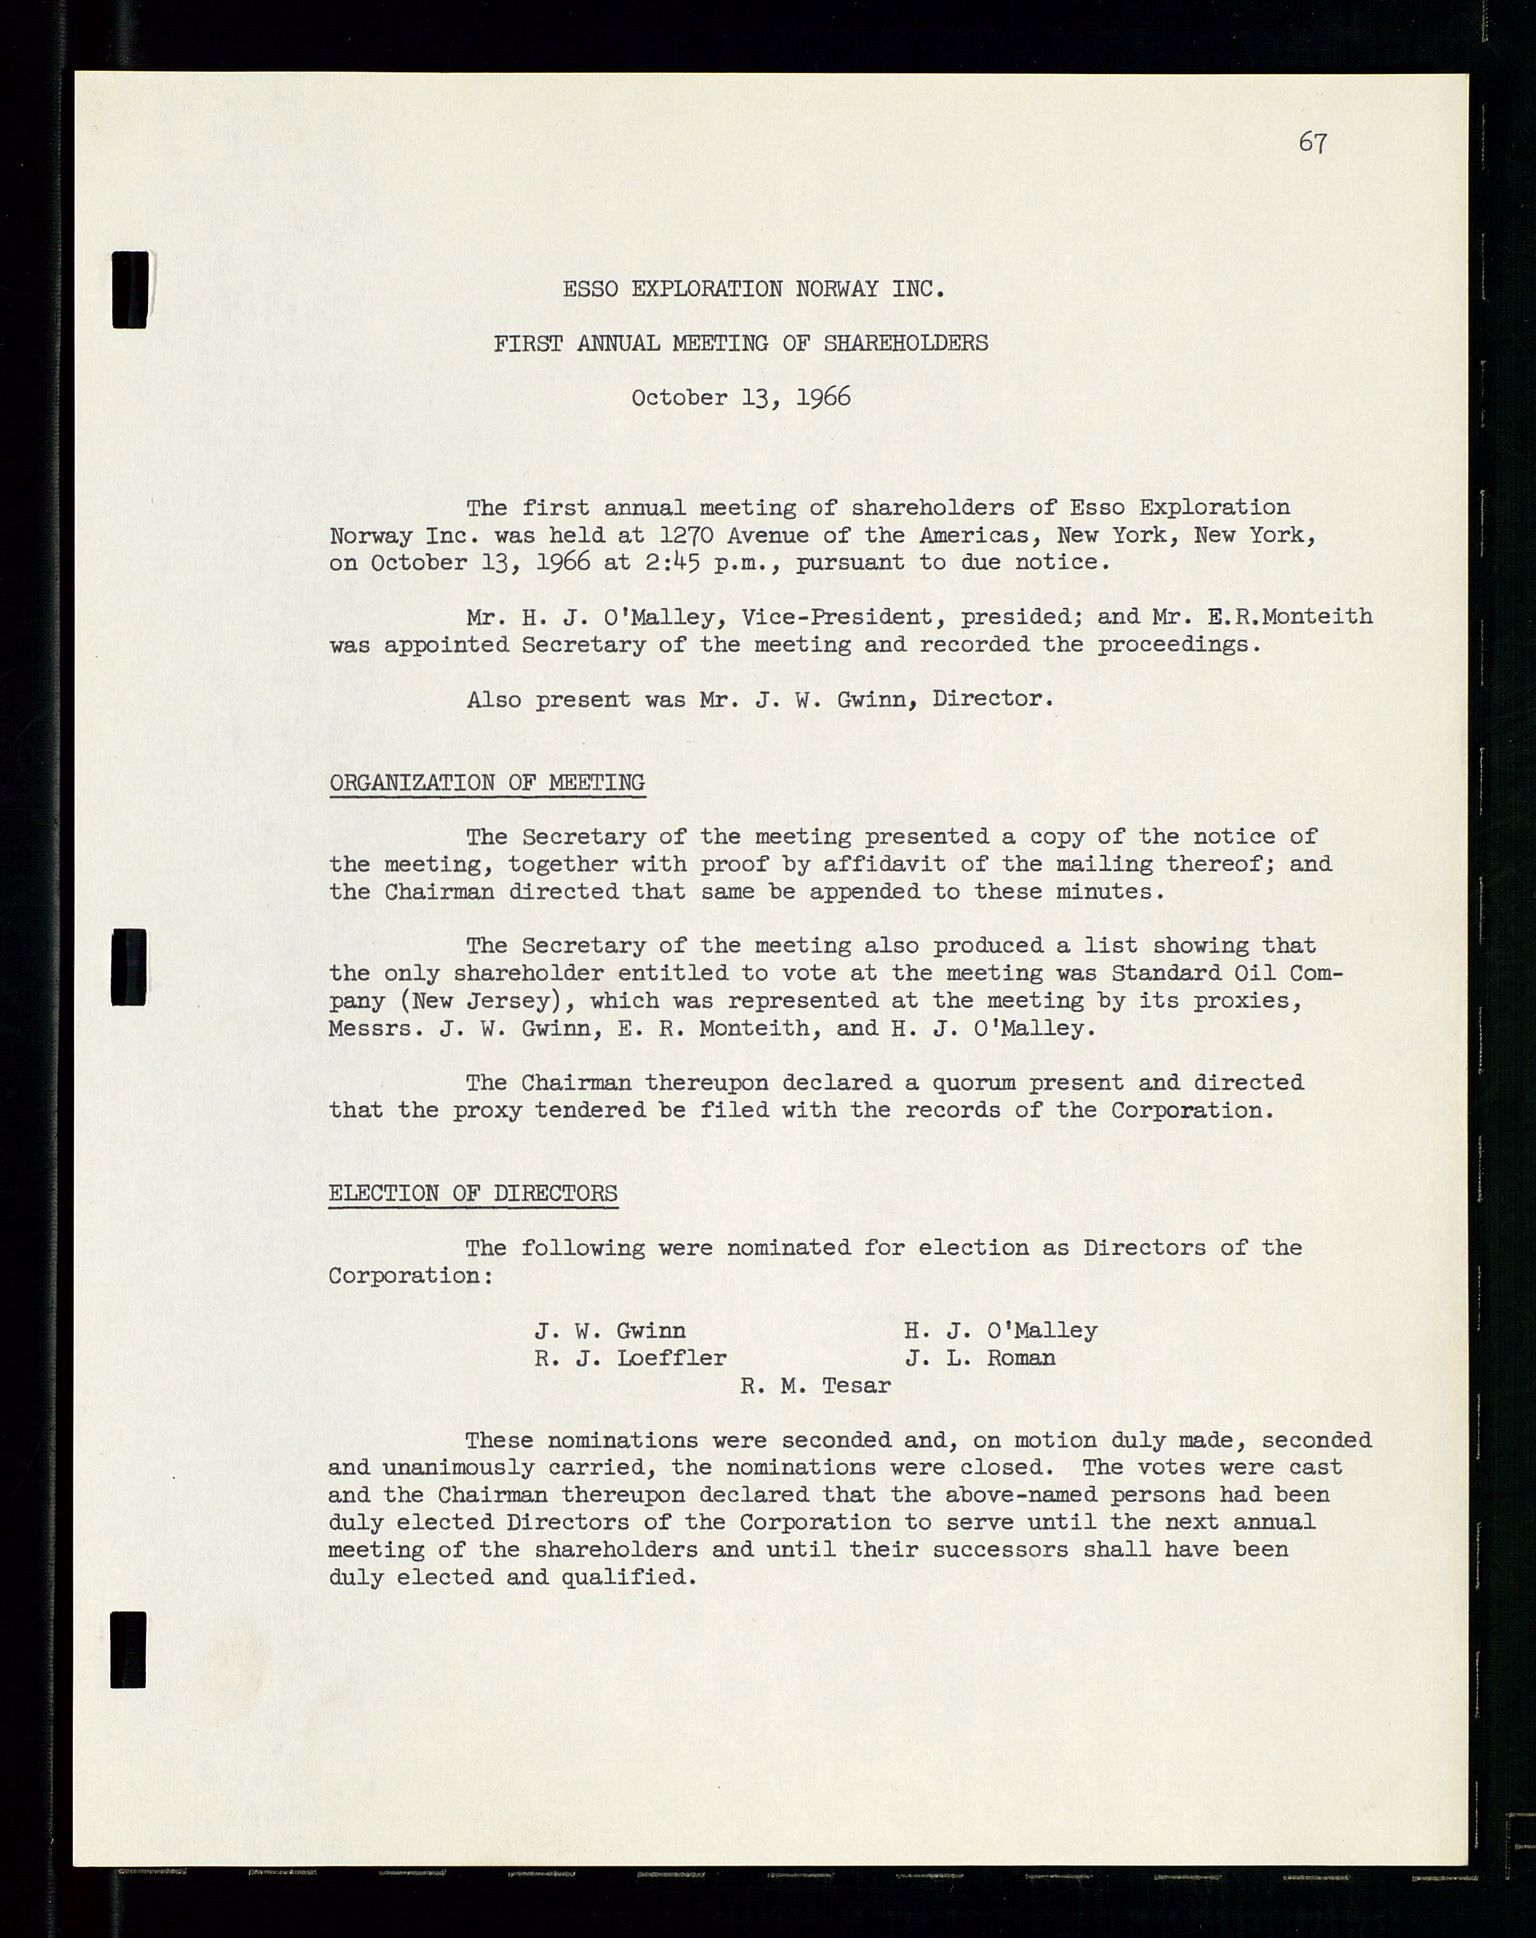 Pa 1512 - Esso Exploration and Production Norway Inc., SAST/A-101917/A/Aa/L0001/0001: Styredokumenter / Corporate records, By-Laws, Board meeting minutes, Incorporations, 1965-1975, p. 67